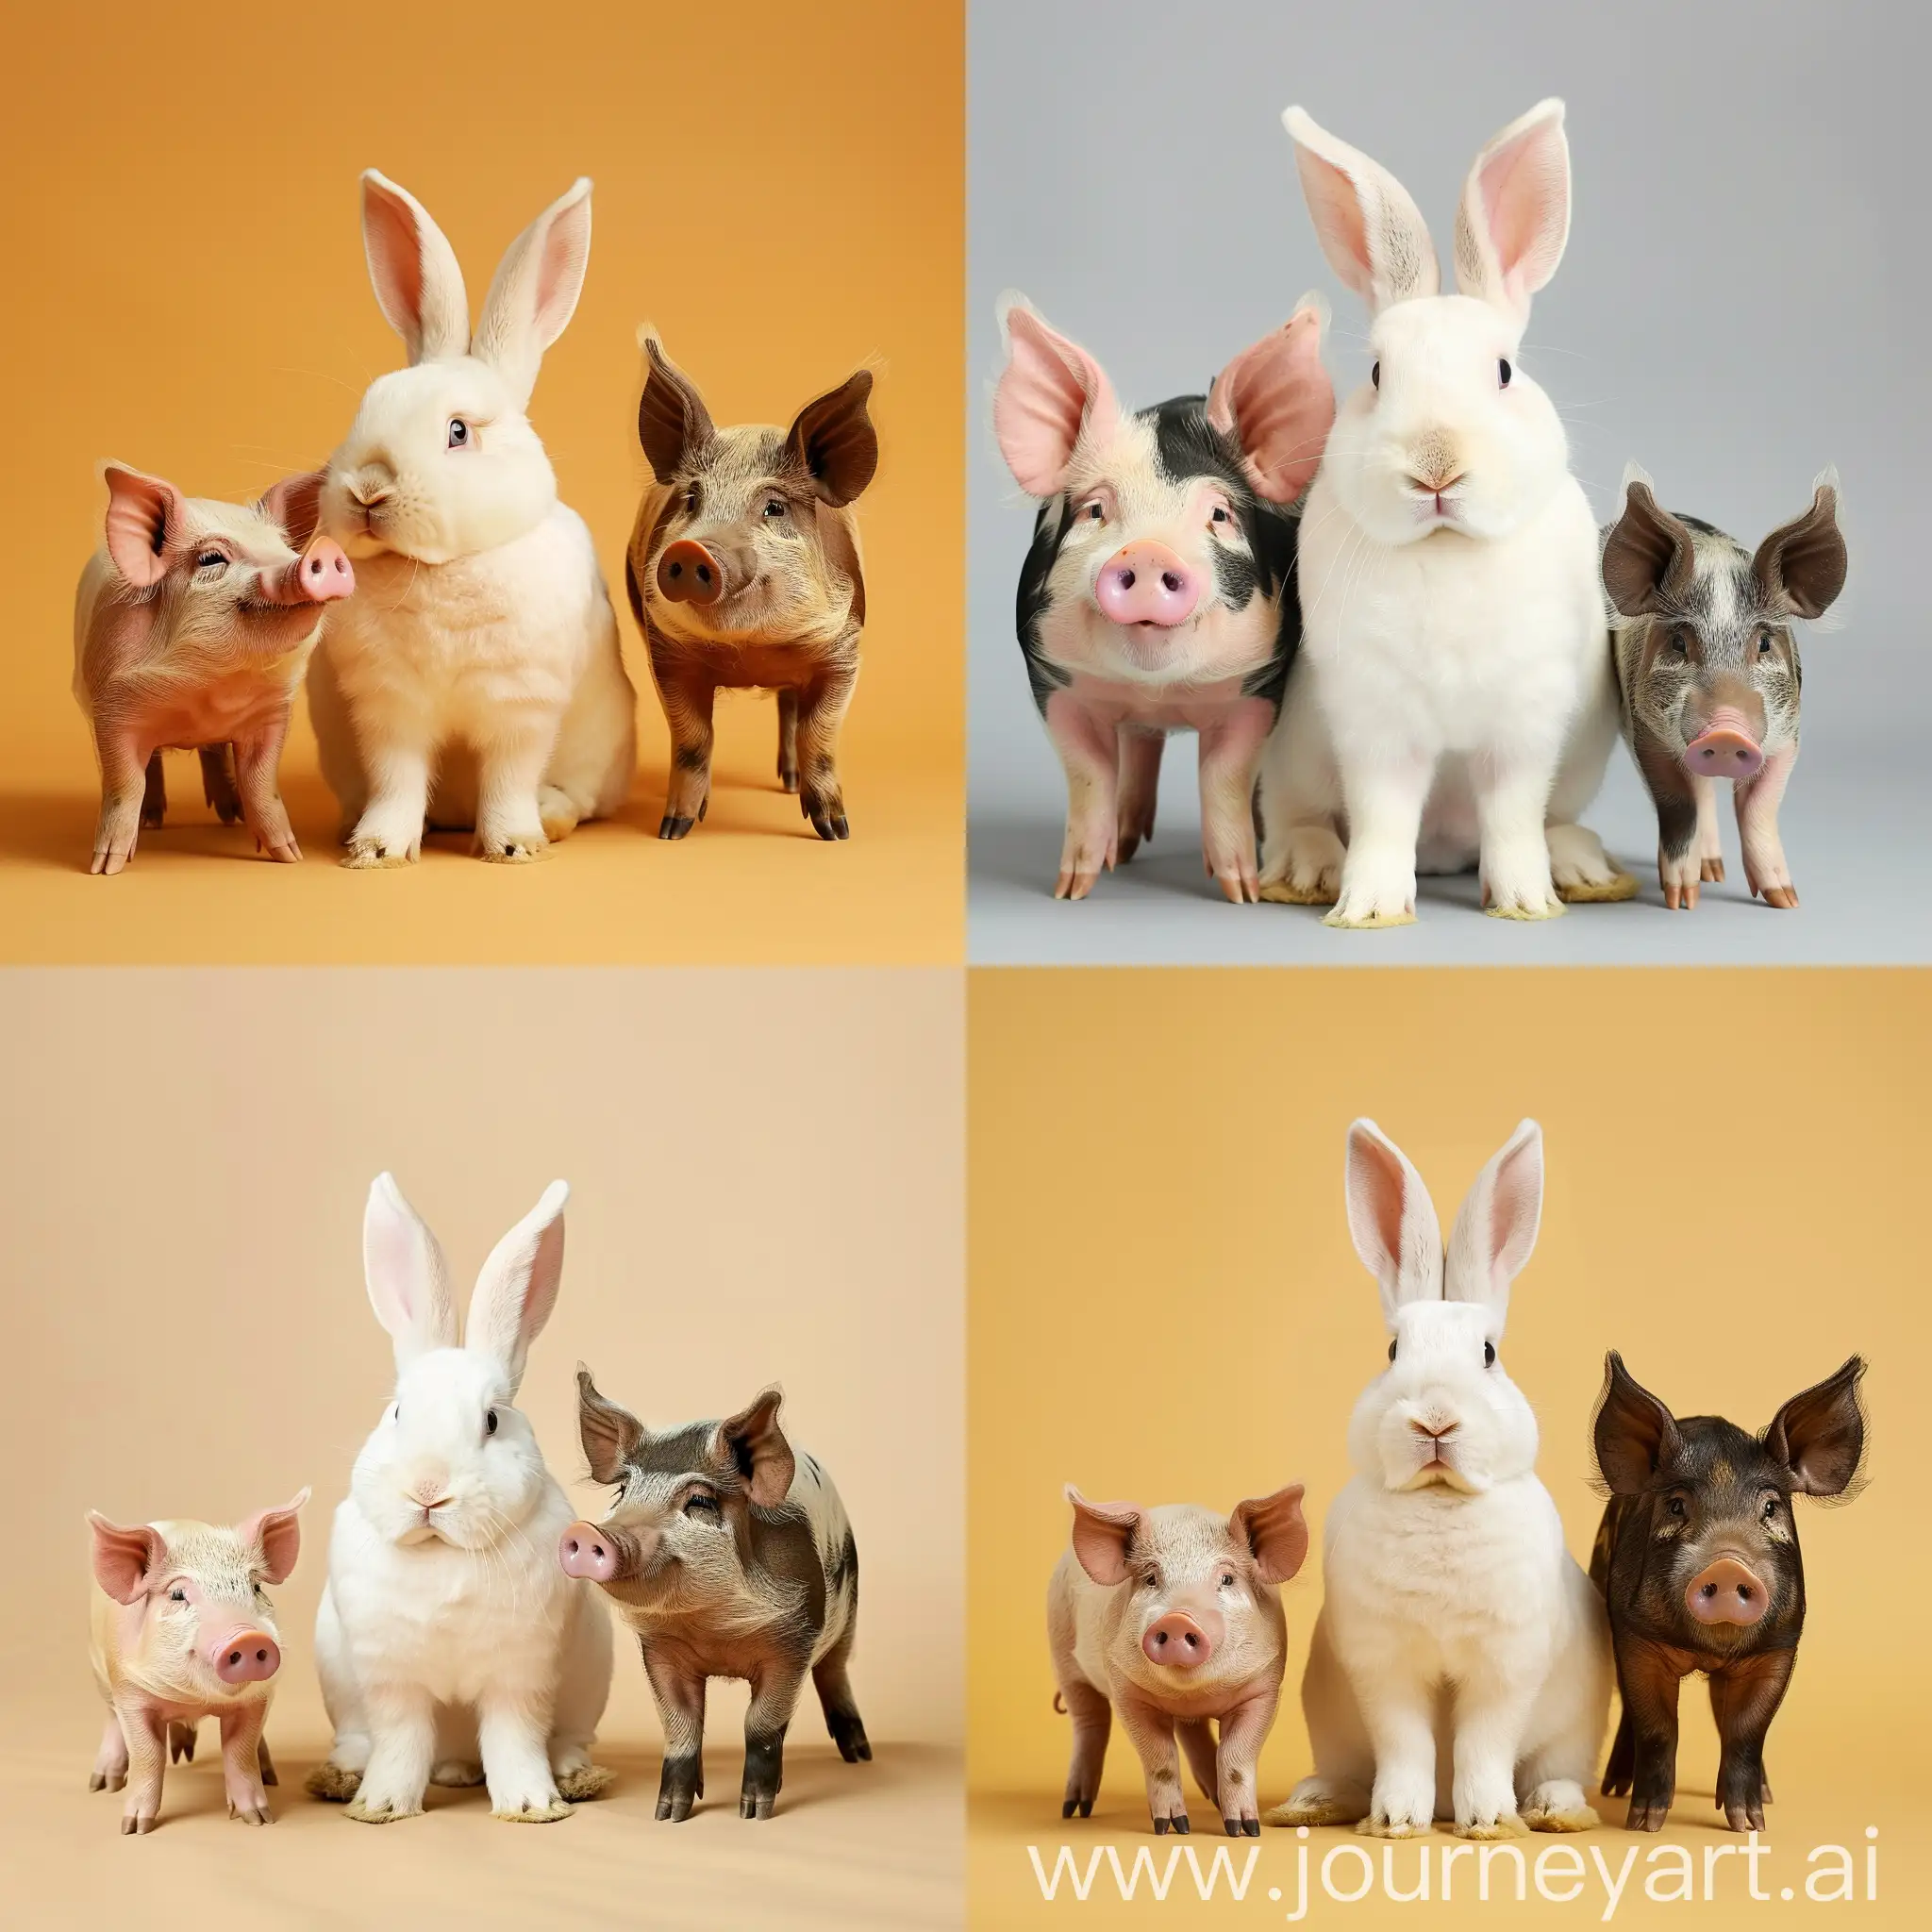 One cute white rabbit at the centre and two pigs at the corner one is of pink colour another one is of brown colour